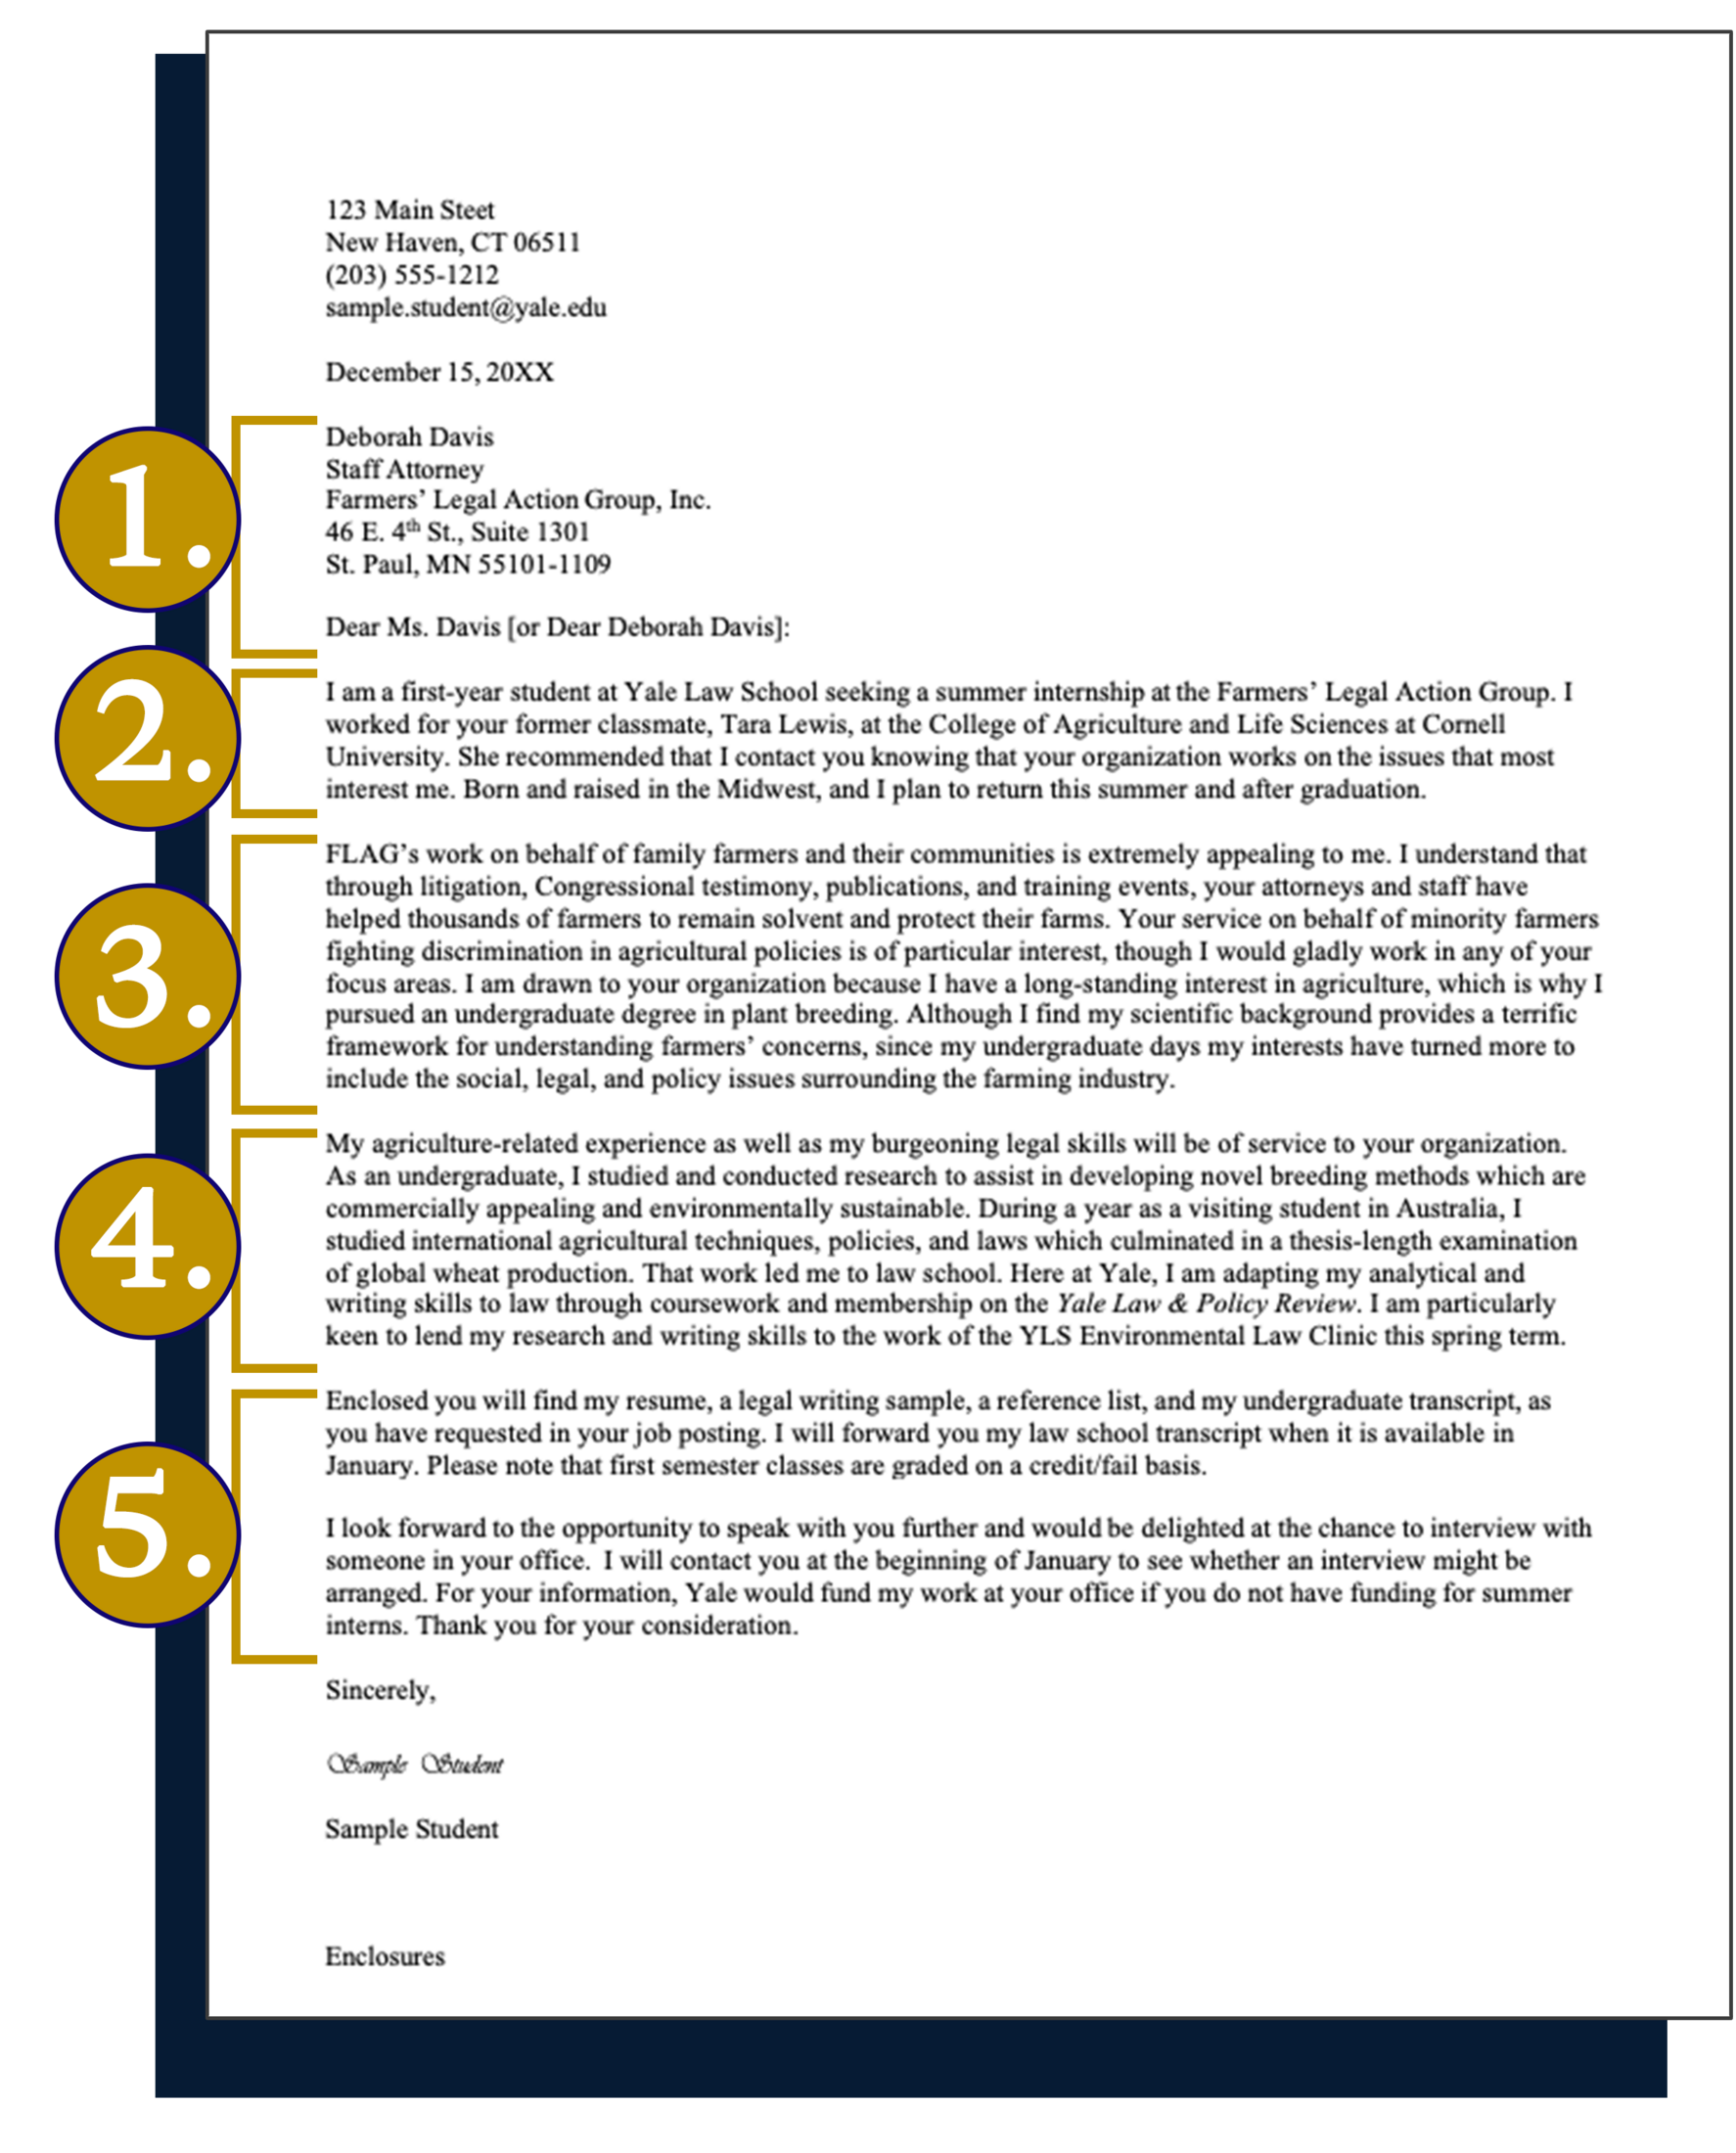 sample application letters